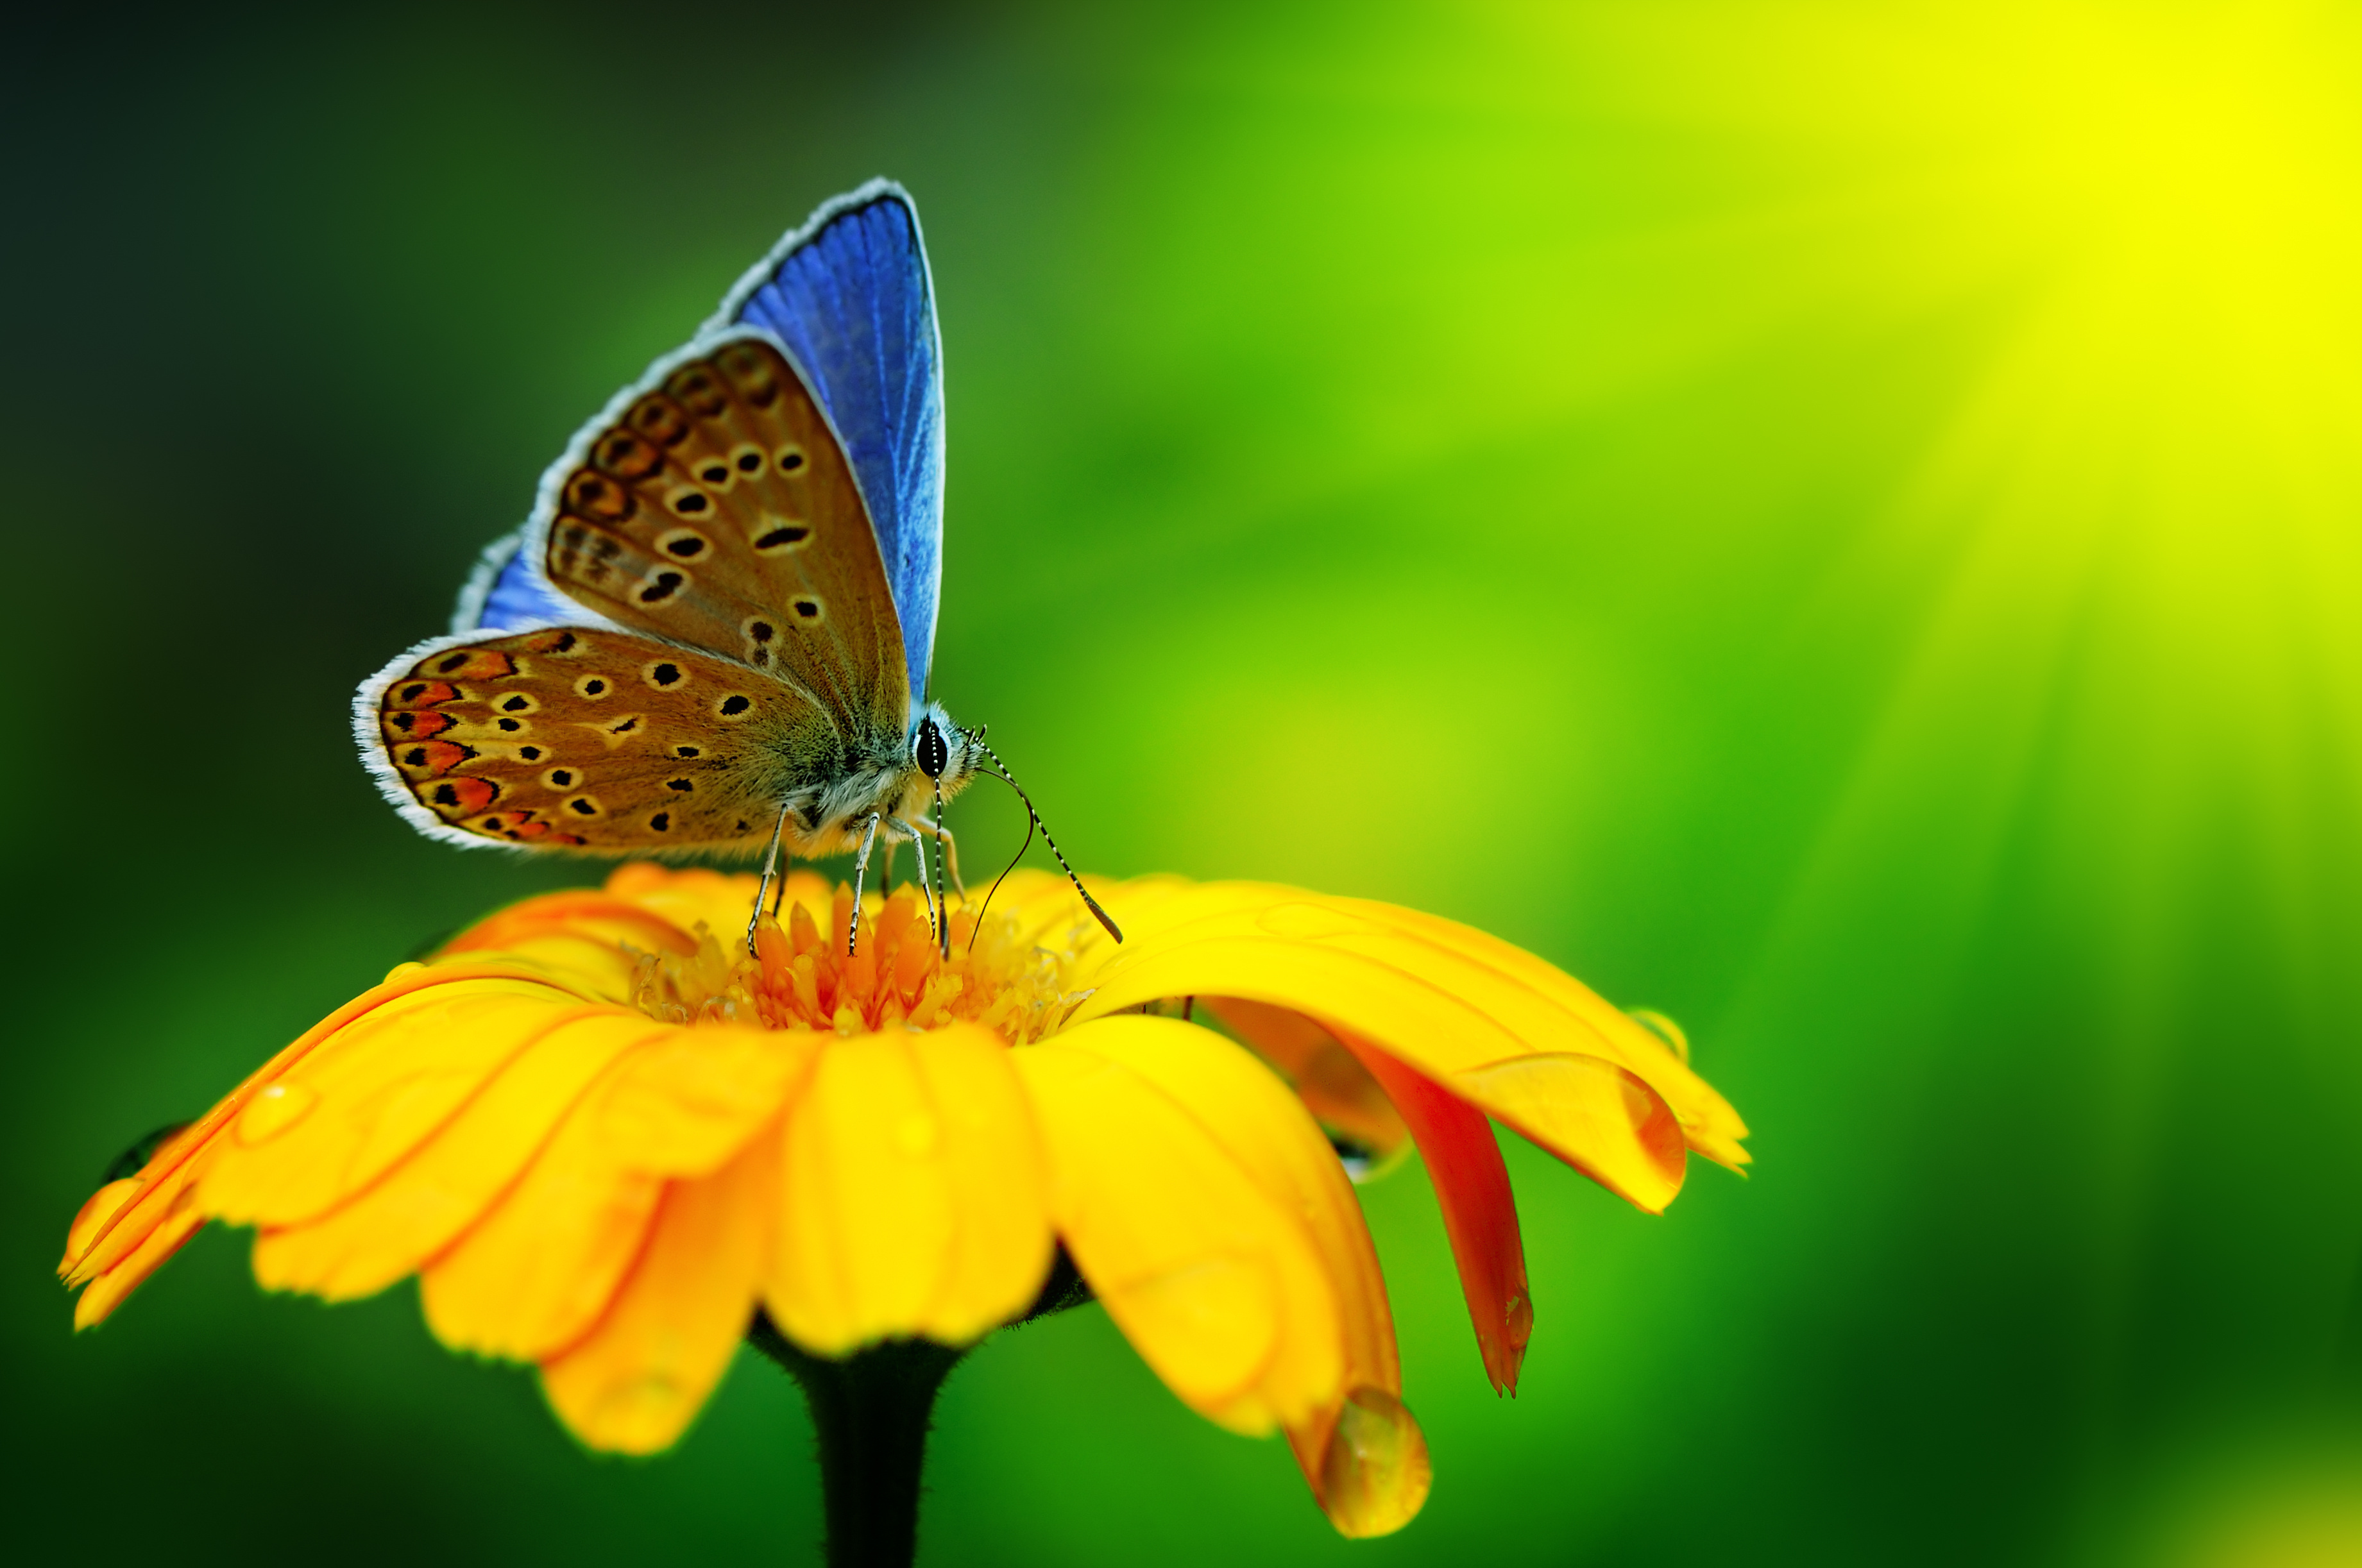 close up, Wallpaper, Butterfly, Insect, Flower, Drops, Yellow, Green, Brigh Wallpapers HD